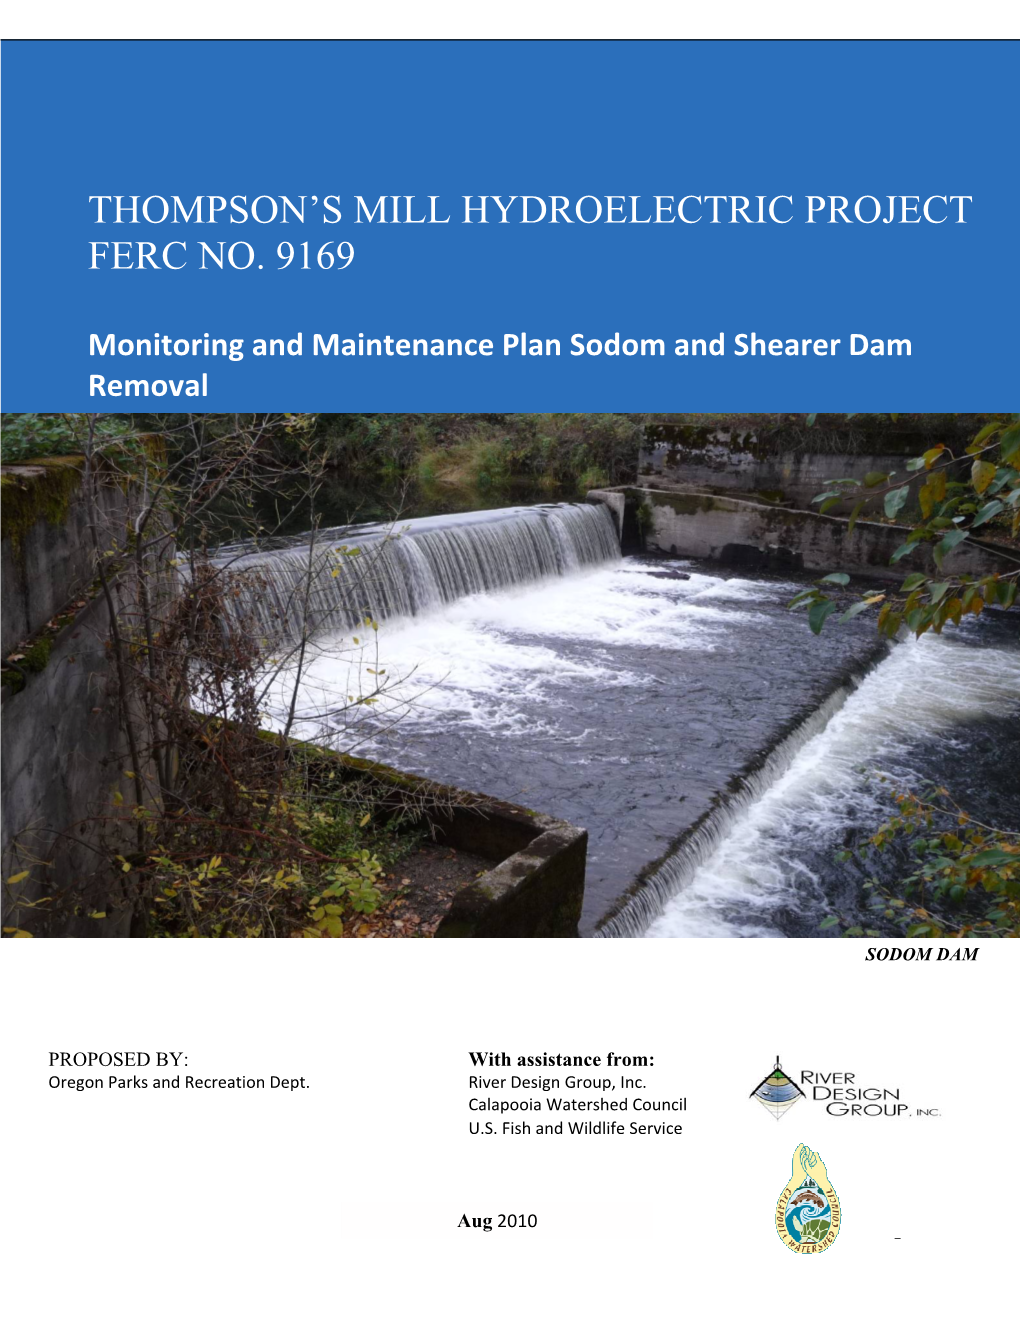 Thompson's Mill Hydroelectric Project